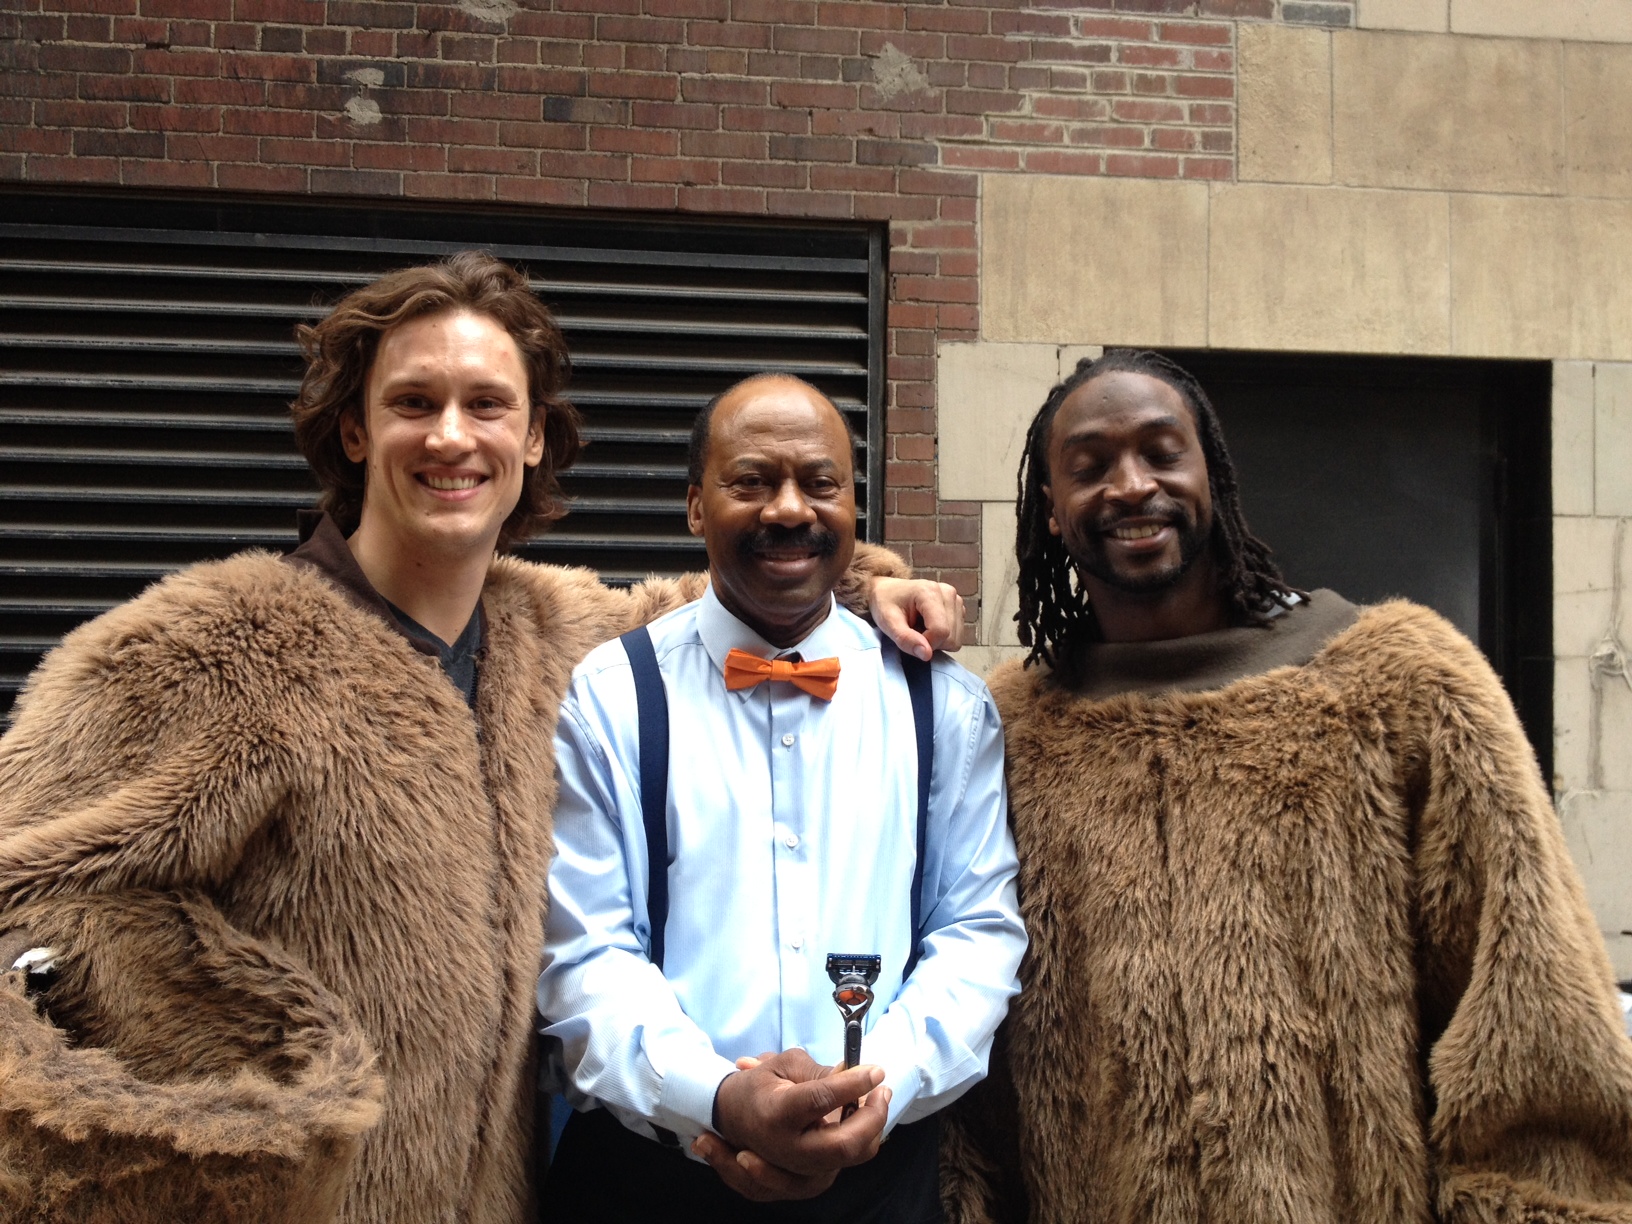 With Peanut Tillman of the Chicago bears and Hank the Barber - Gillette 2014